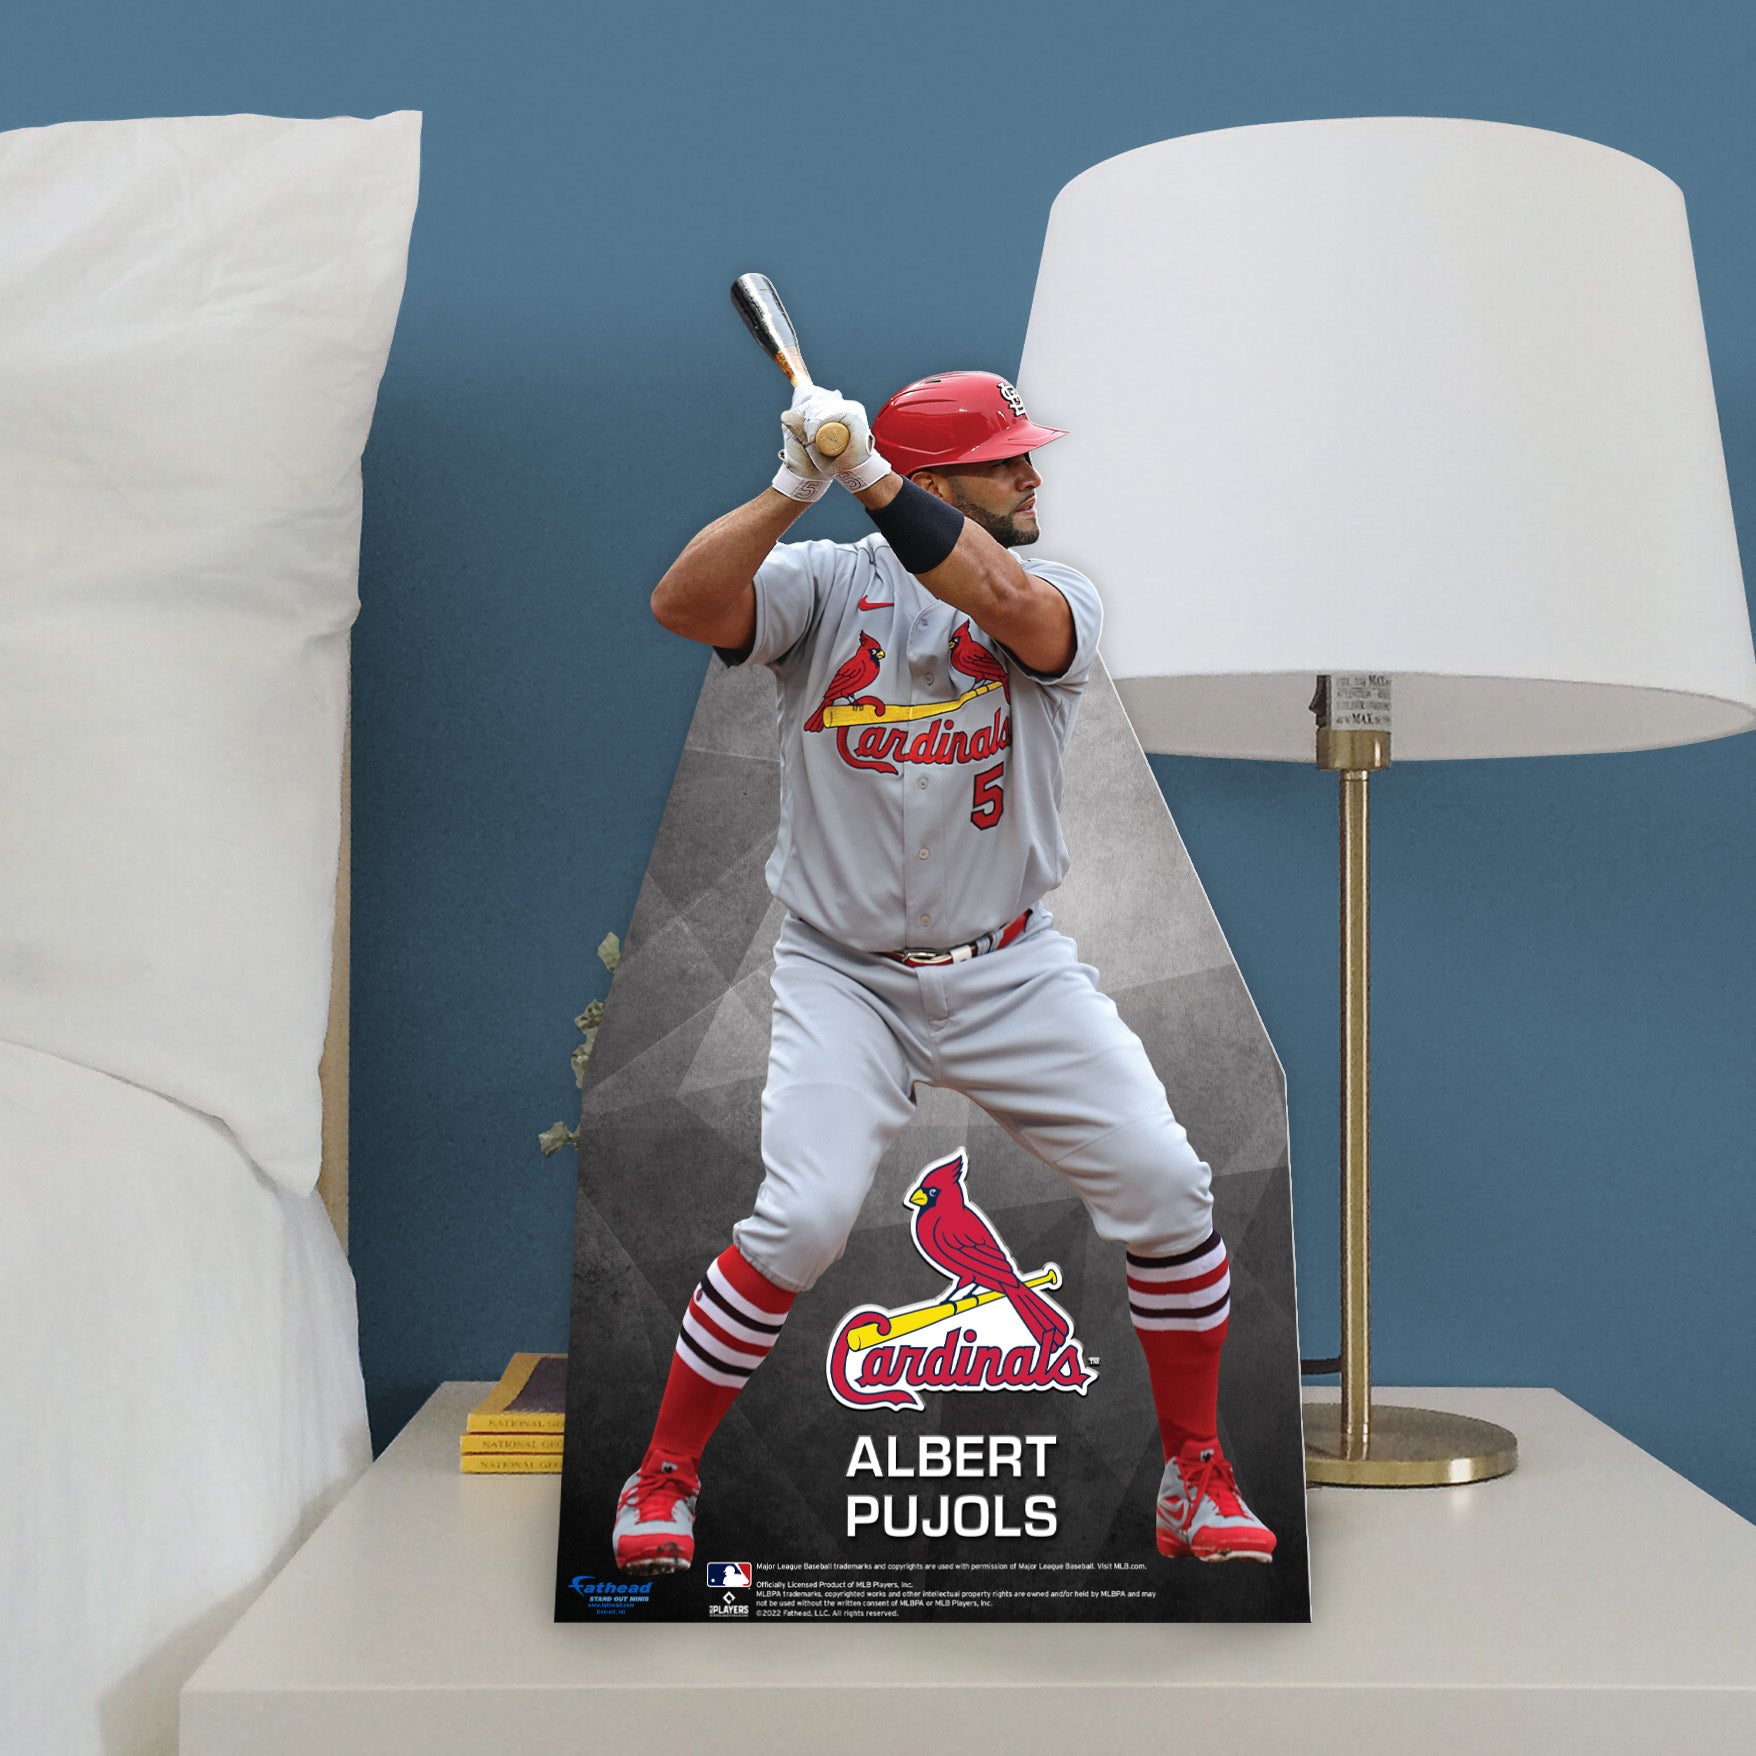 Buy This Classic St. Louis Cardinals Poster Online